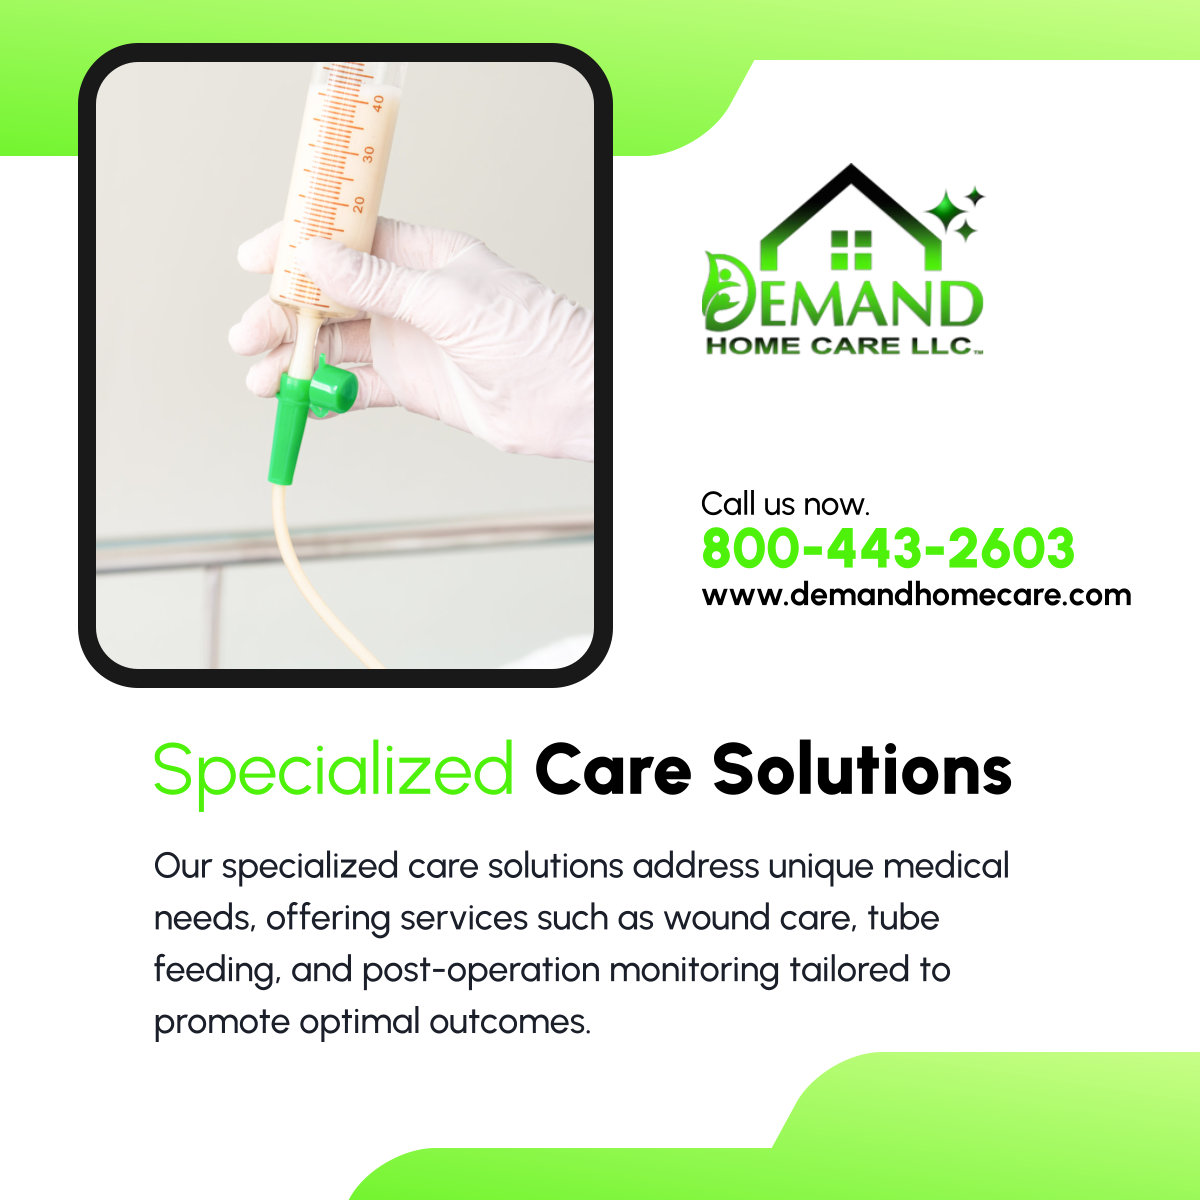 Discover our specialized care solutions tailored to address unique medical needs and promote optimal outcomes. Contact us at (800)443-2603 to learn more. 

#SpecializedCare #QualityCare #HomeCare #OptimalOutcomes #DetroitMI